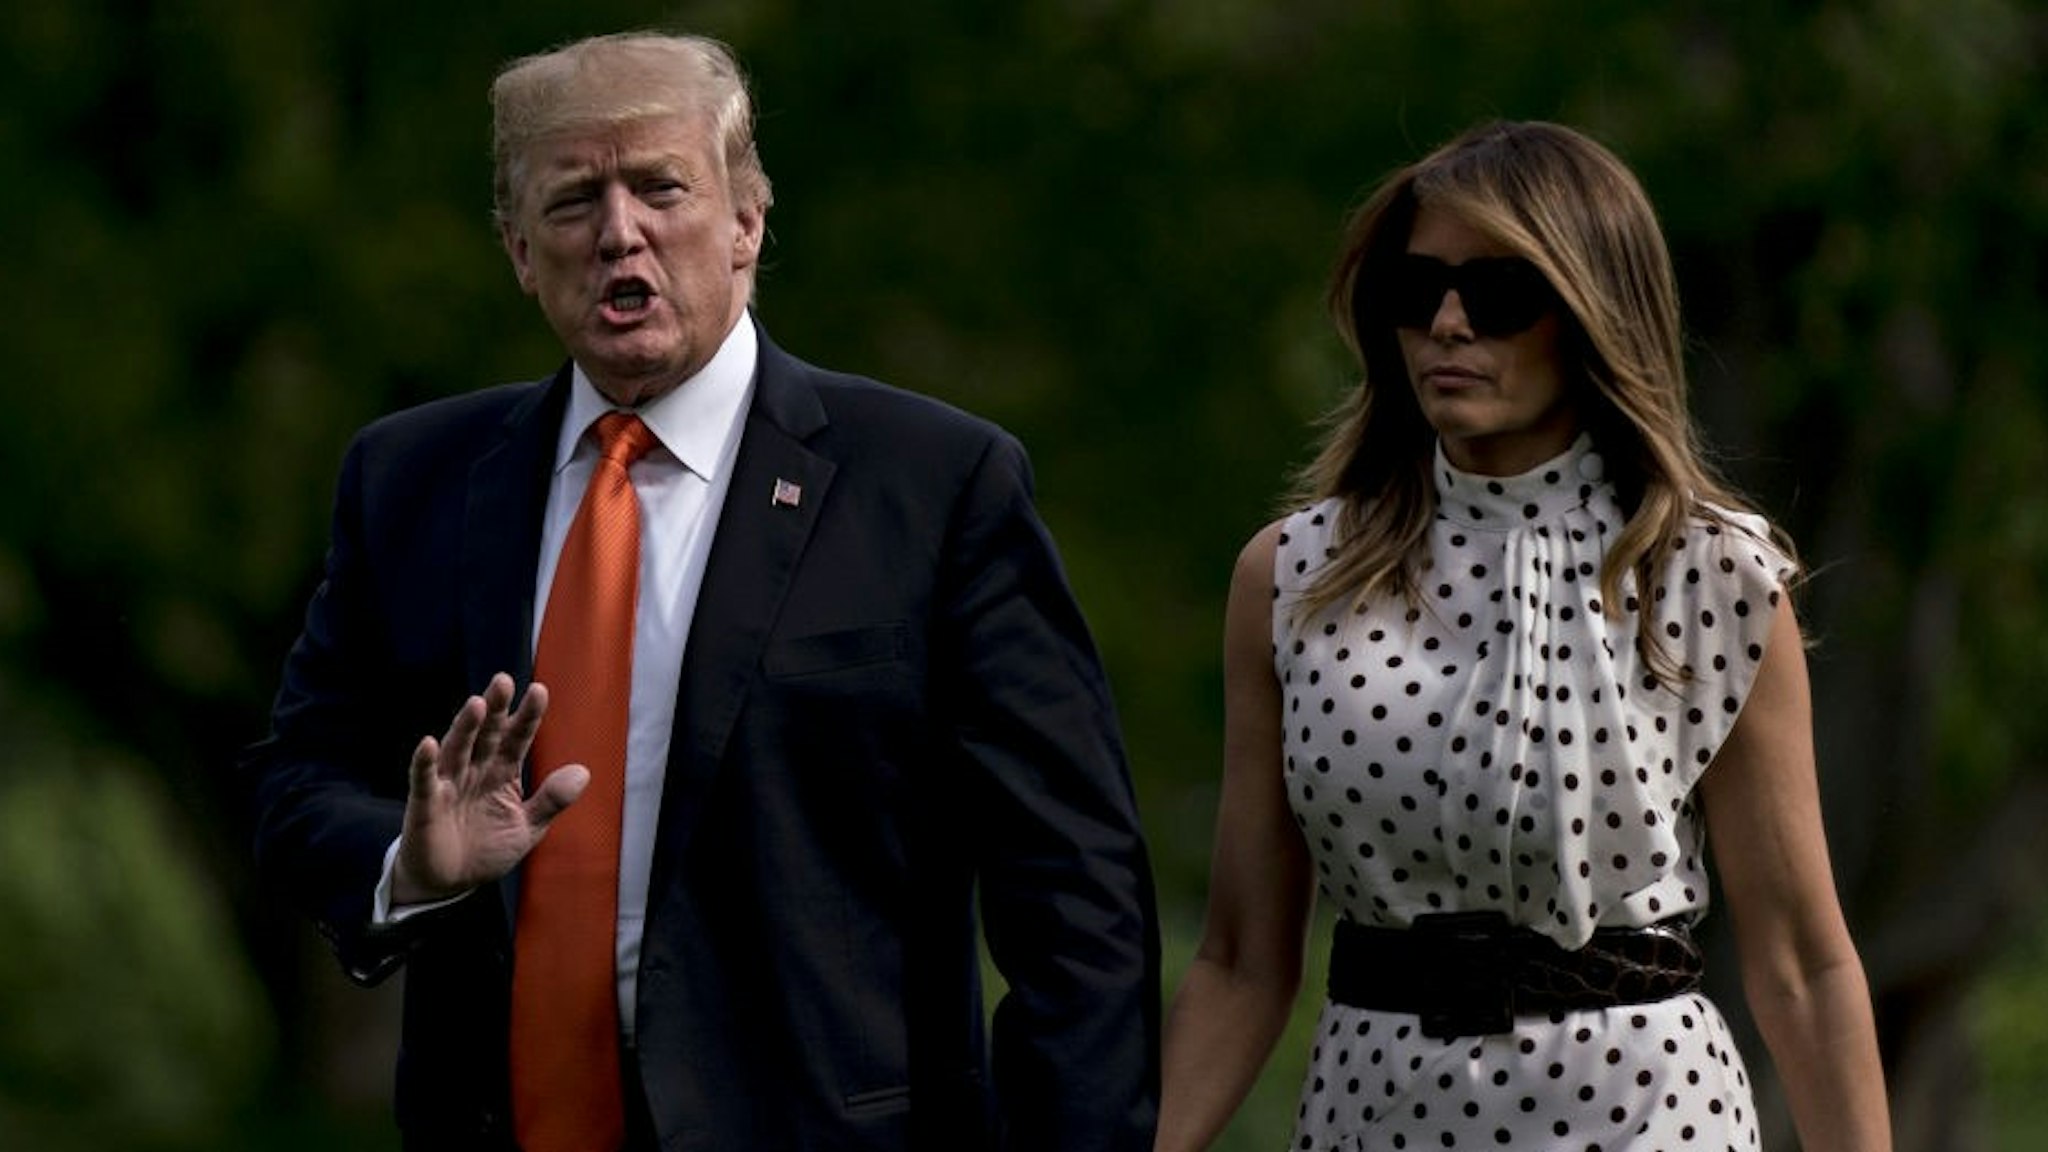 U.S. President Donald Trump waves while walking on the South Lawn of the White House with First Lady Melania Trump after arriving on Marine One in Washington, D.C., U.S., on Wednesday, April 24, 2019. Trump spurned campaign contributions from the pharmaceutical industry today, calling the industry out for its role in a national opioid addiction epidemic. Photographer: